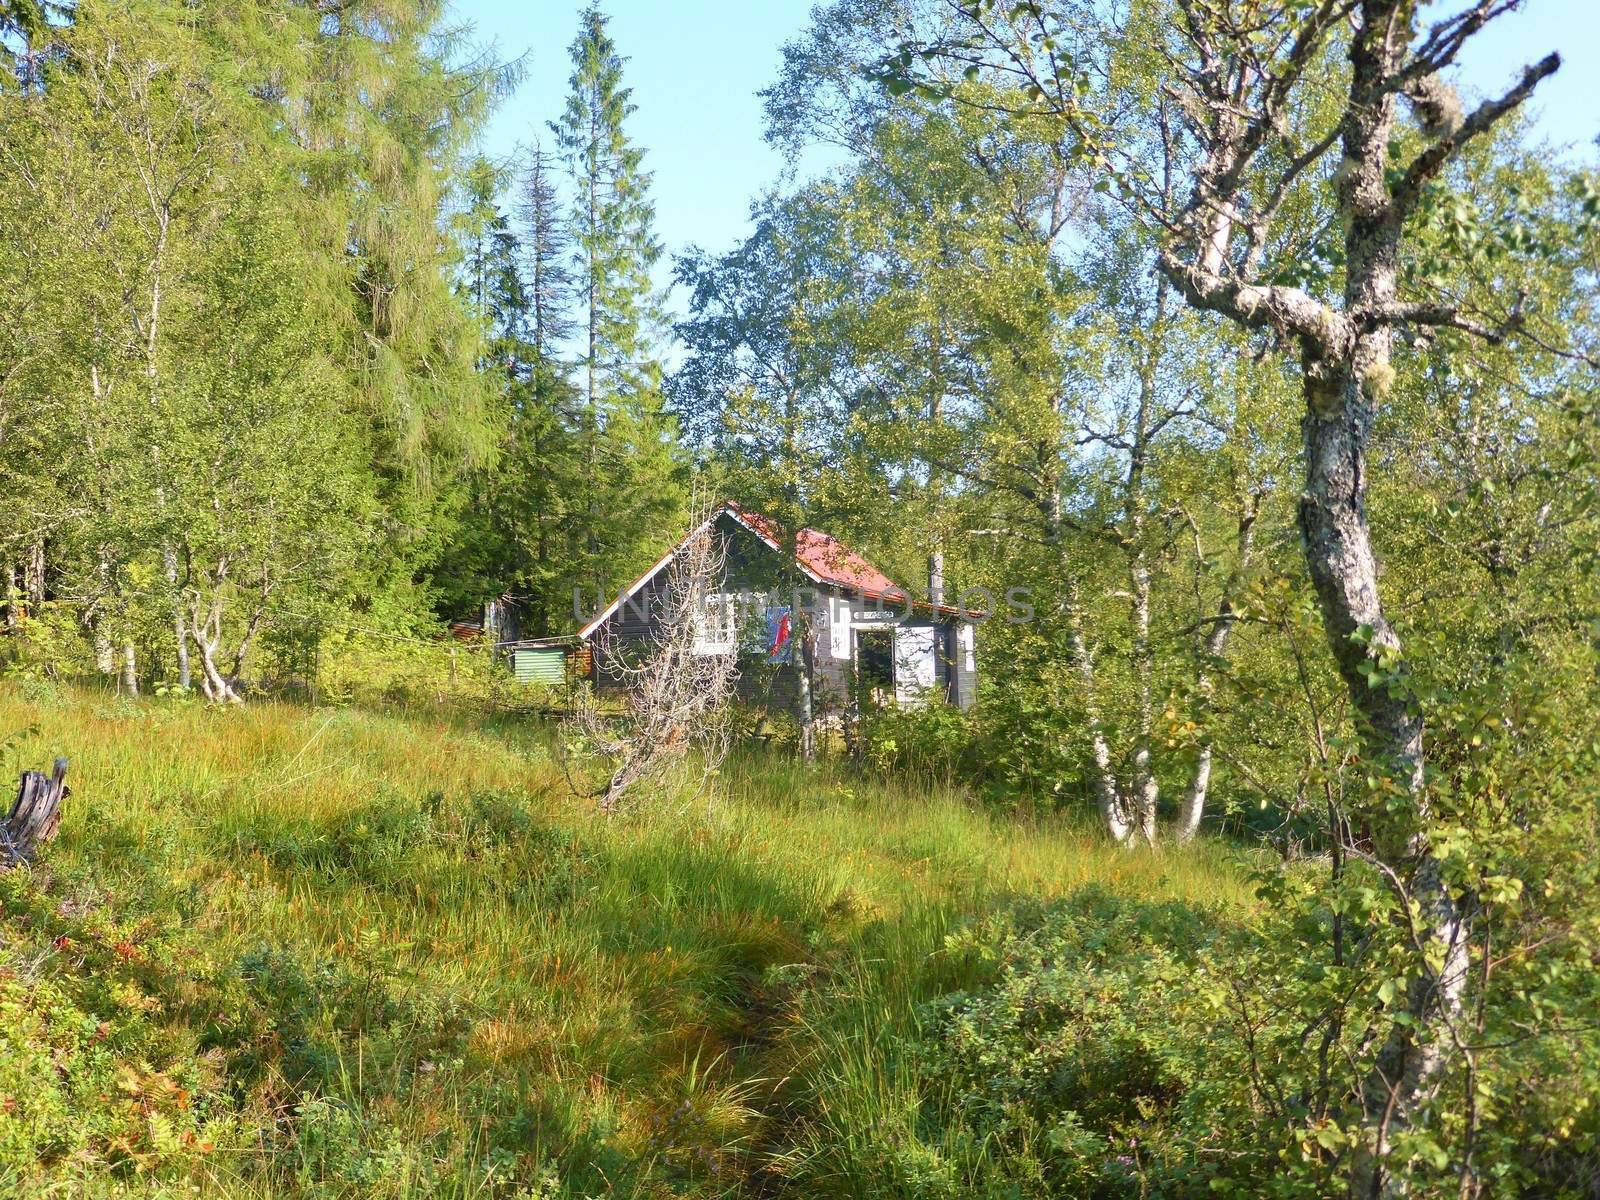 A peaceful image of a cabin in beautiful Norwegian countryside, close to the town of Molde.